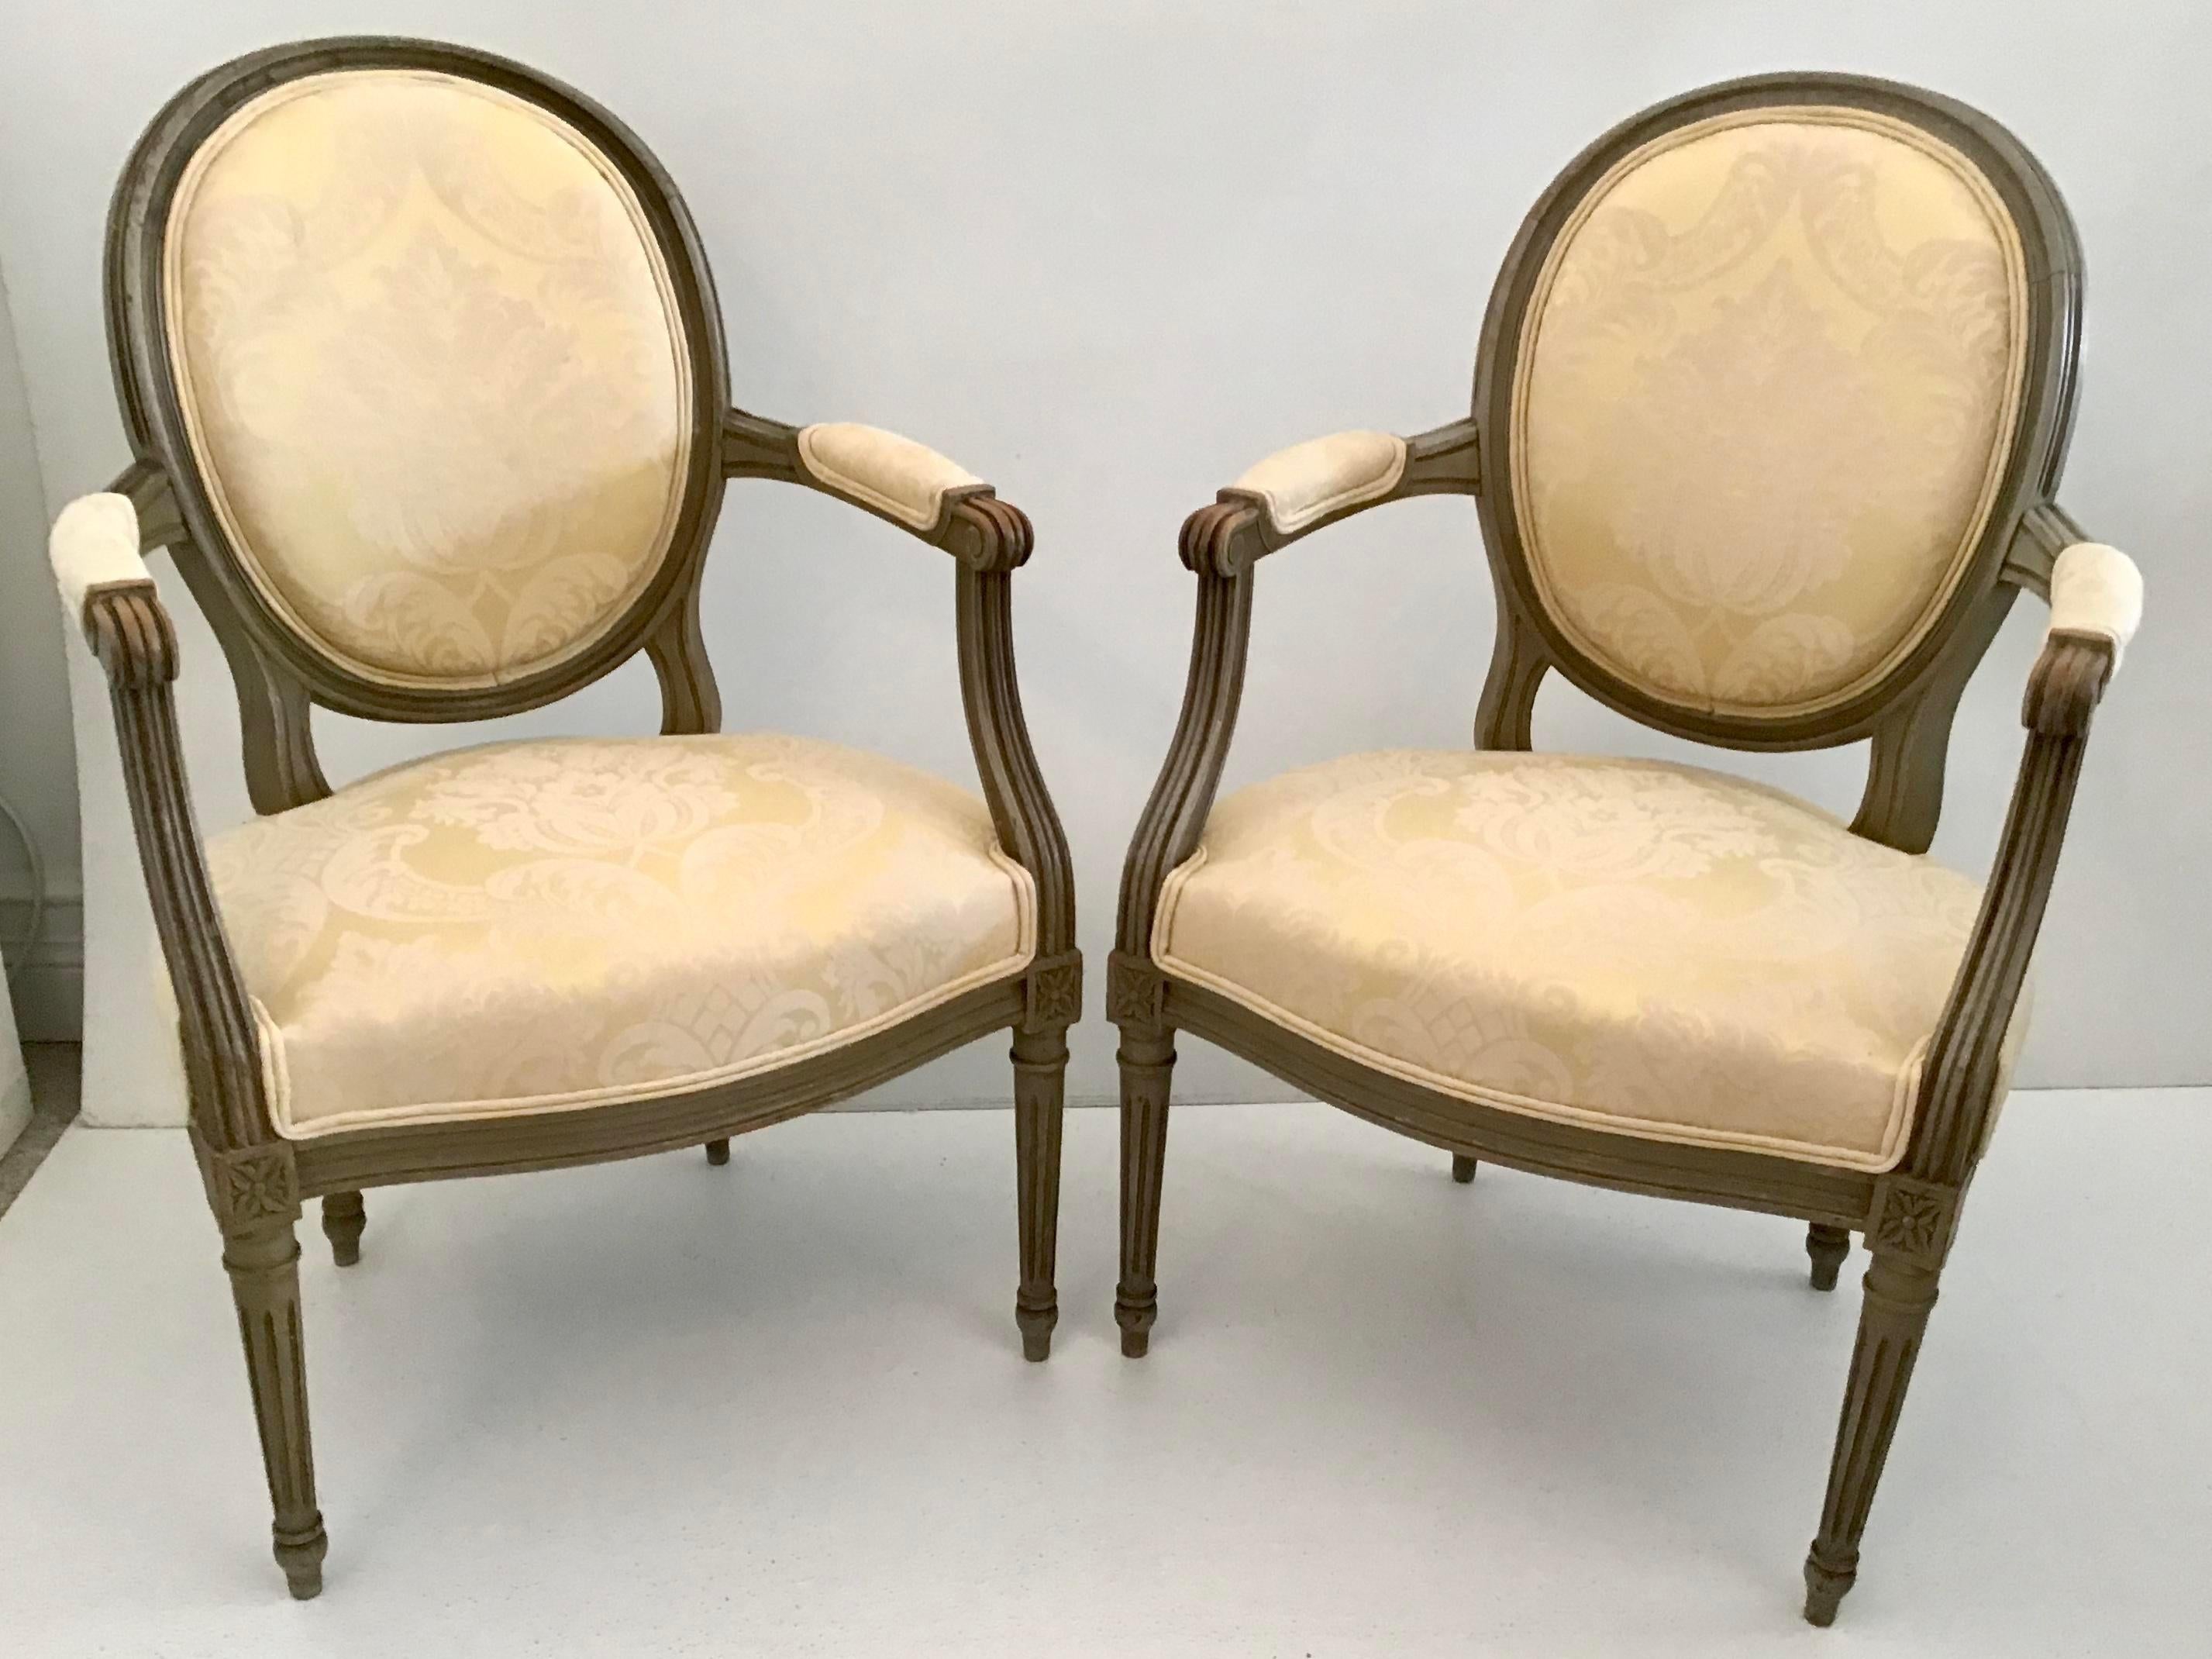 French Bronze Louis XVI Fauteuils in New Yellow Damask Upholstery, a Pair For Sale 2